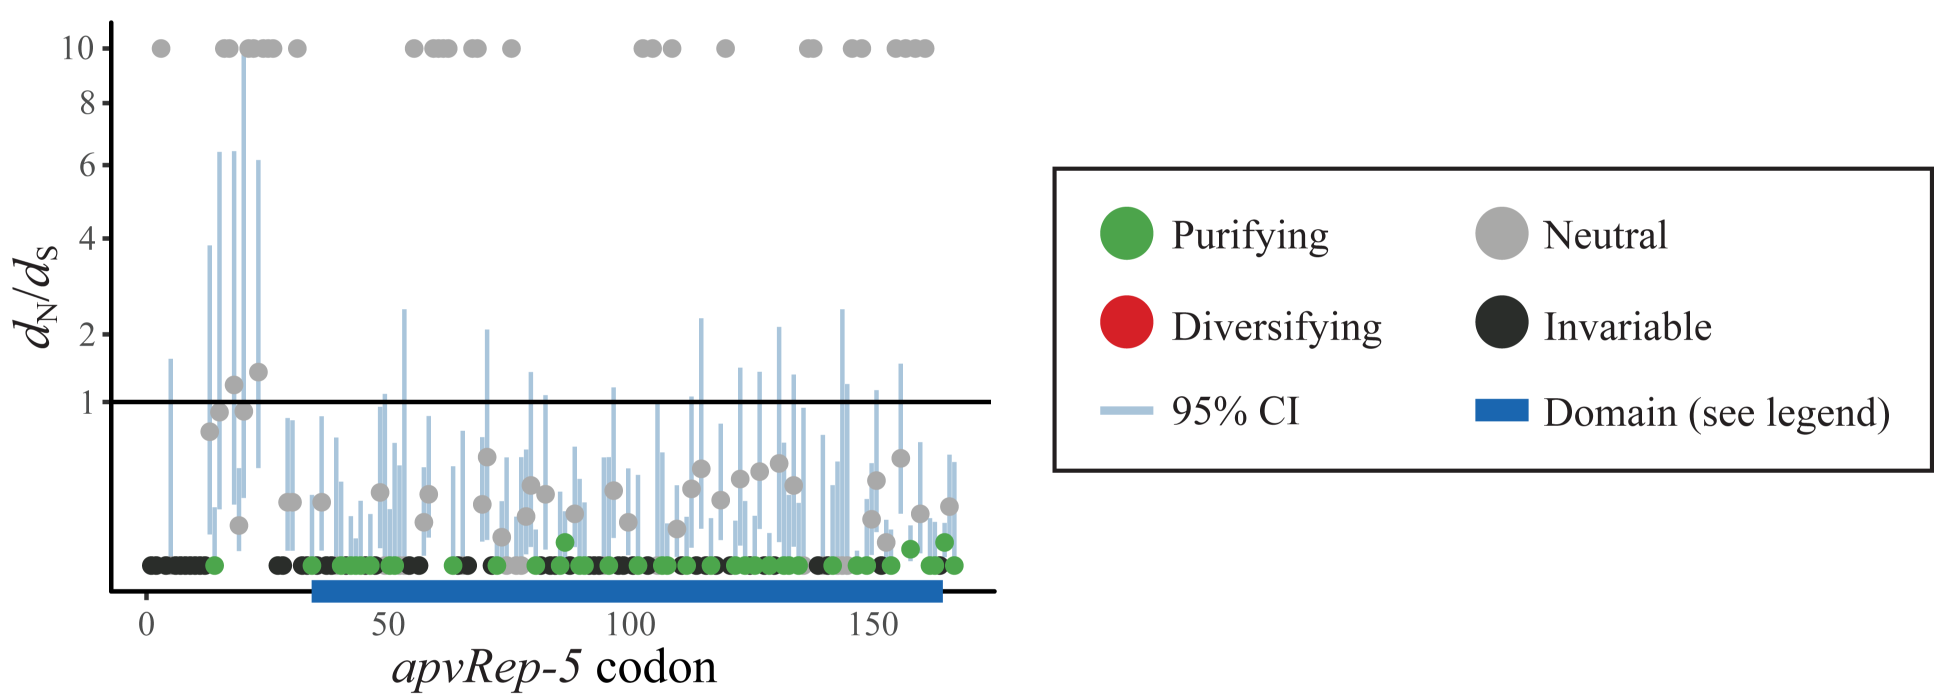 The image shows site-level selection on a virus gene